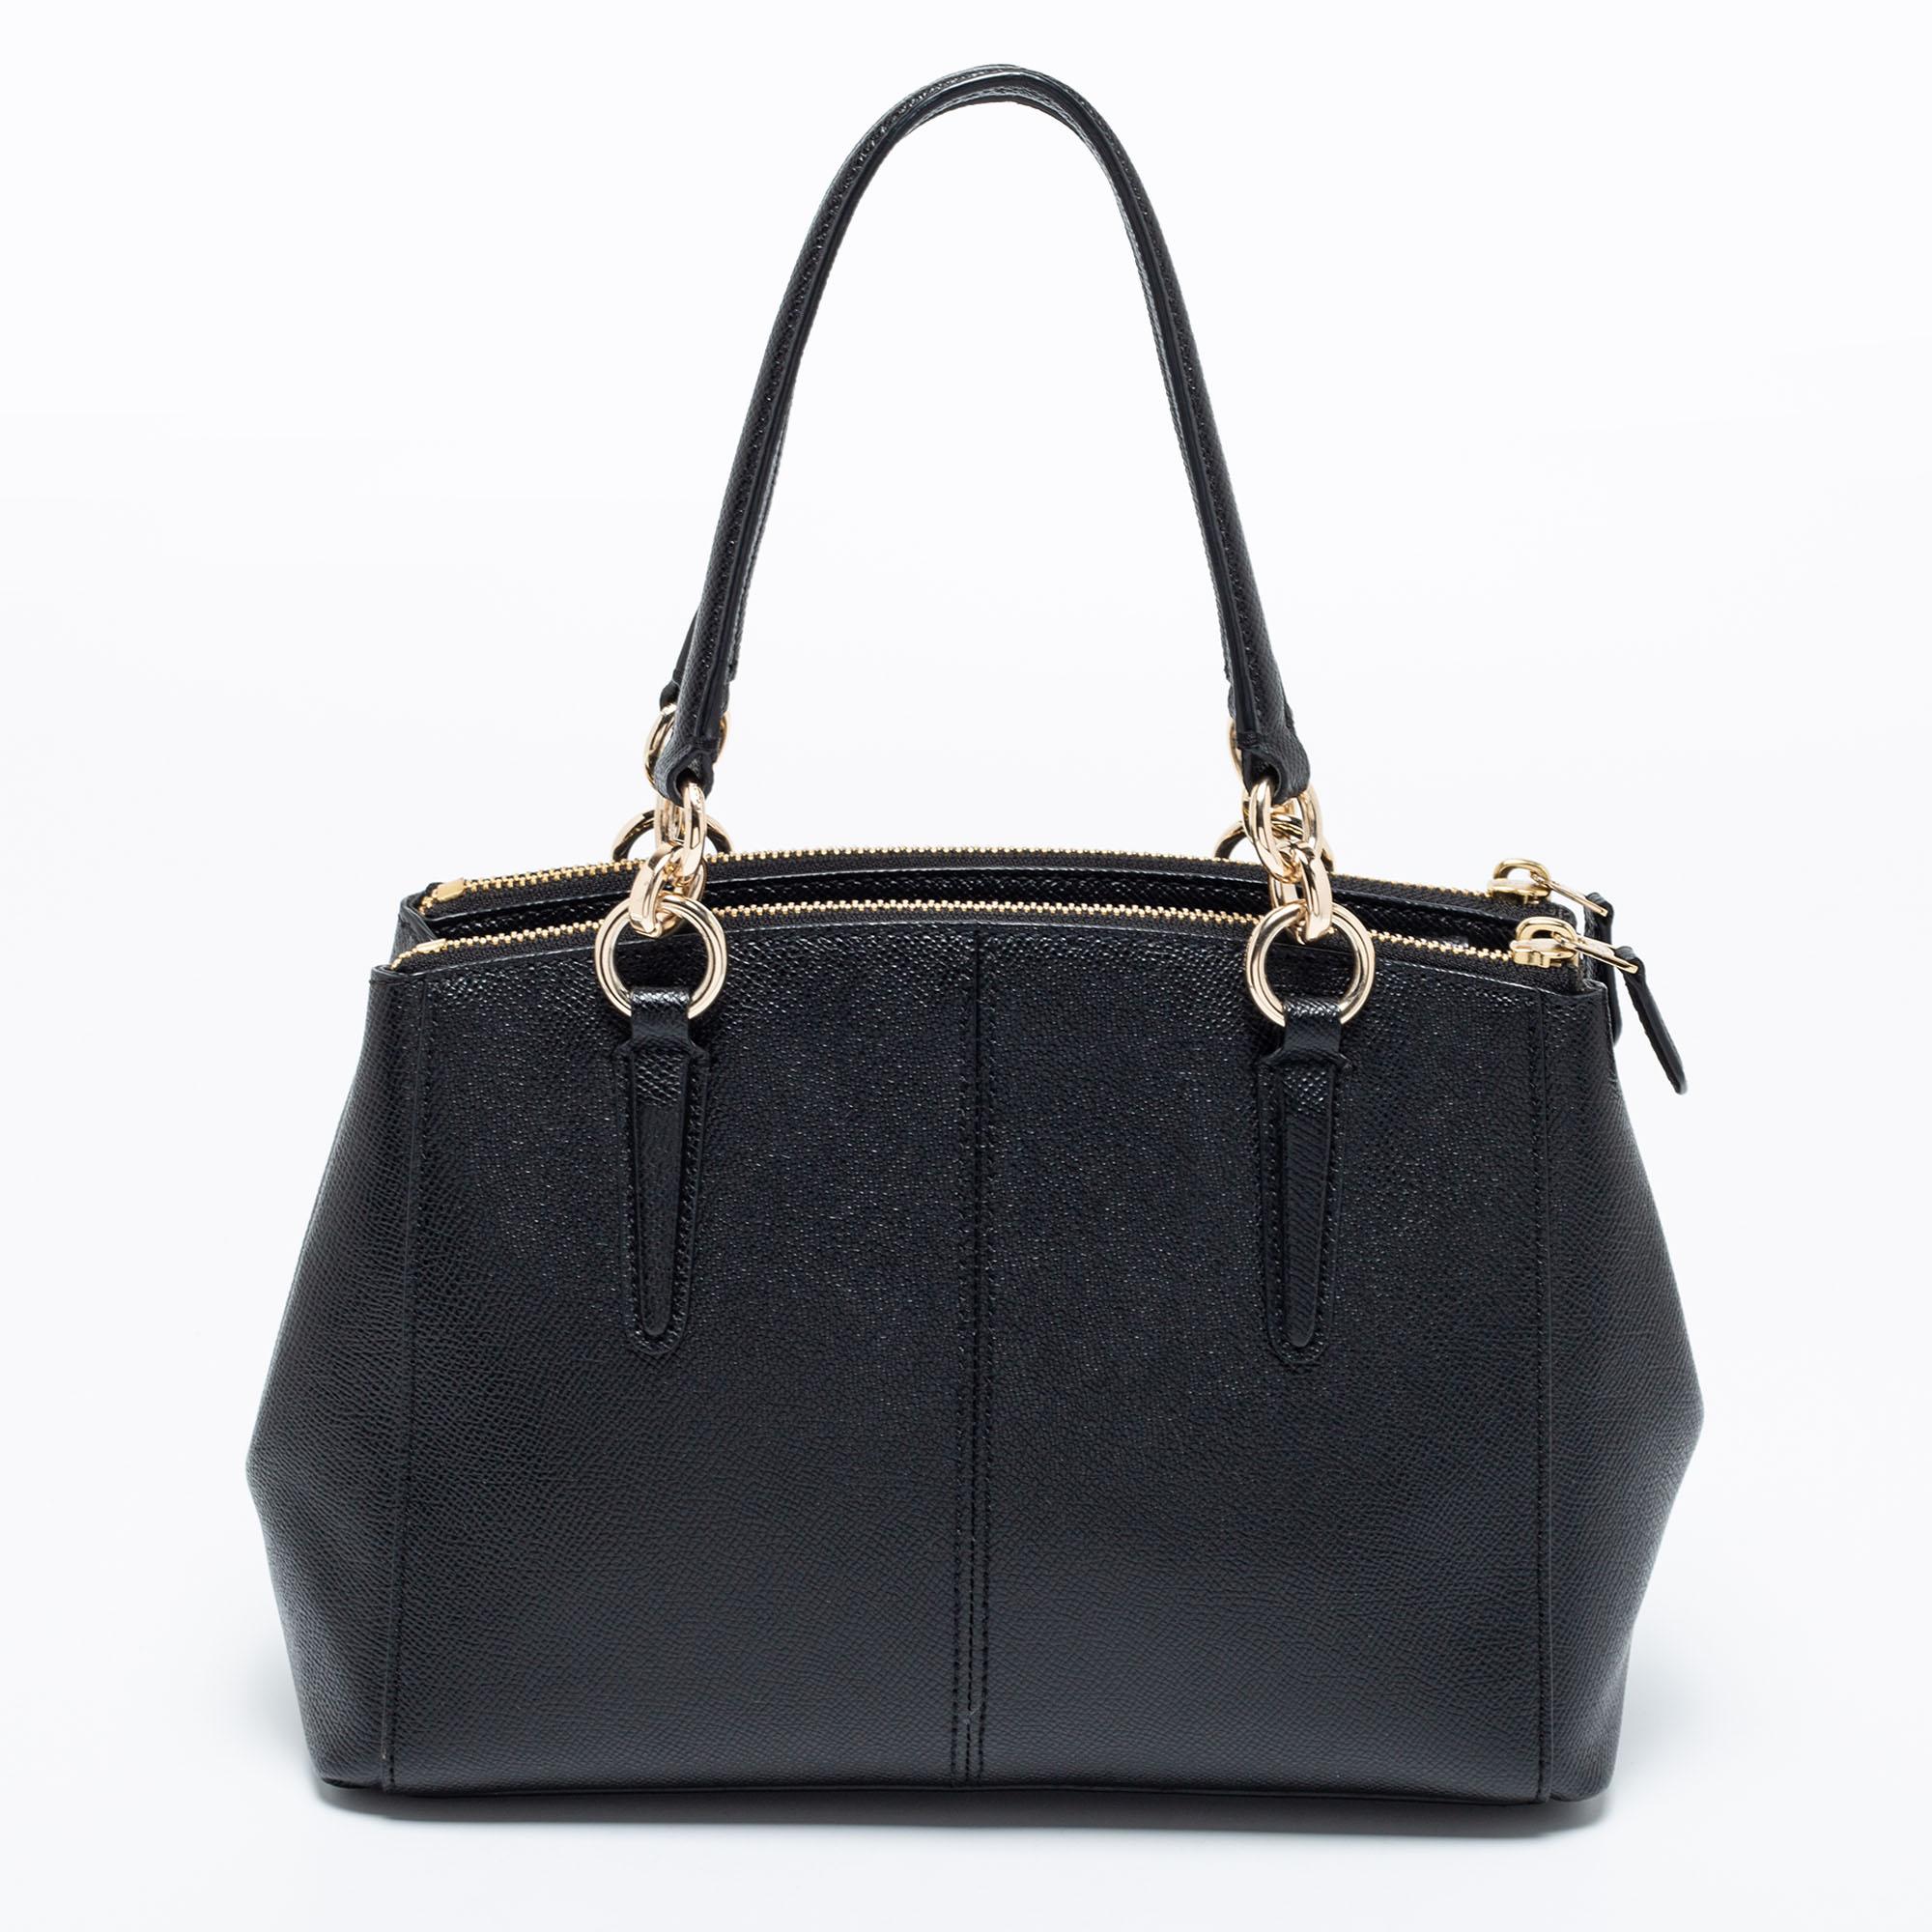 This beautiful Christie Carryall bag from Coach is highly functional and full of charm. Crafted from black leather, the bag features dual handles, a detachable shoulder strap, and brand detail on the front. The fabric-lined interior will hold all